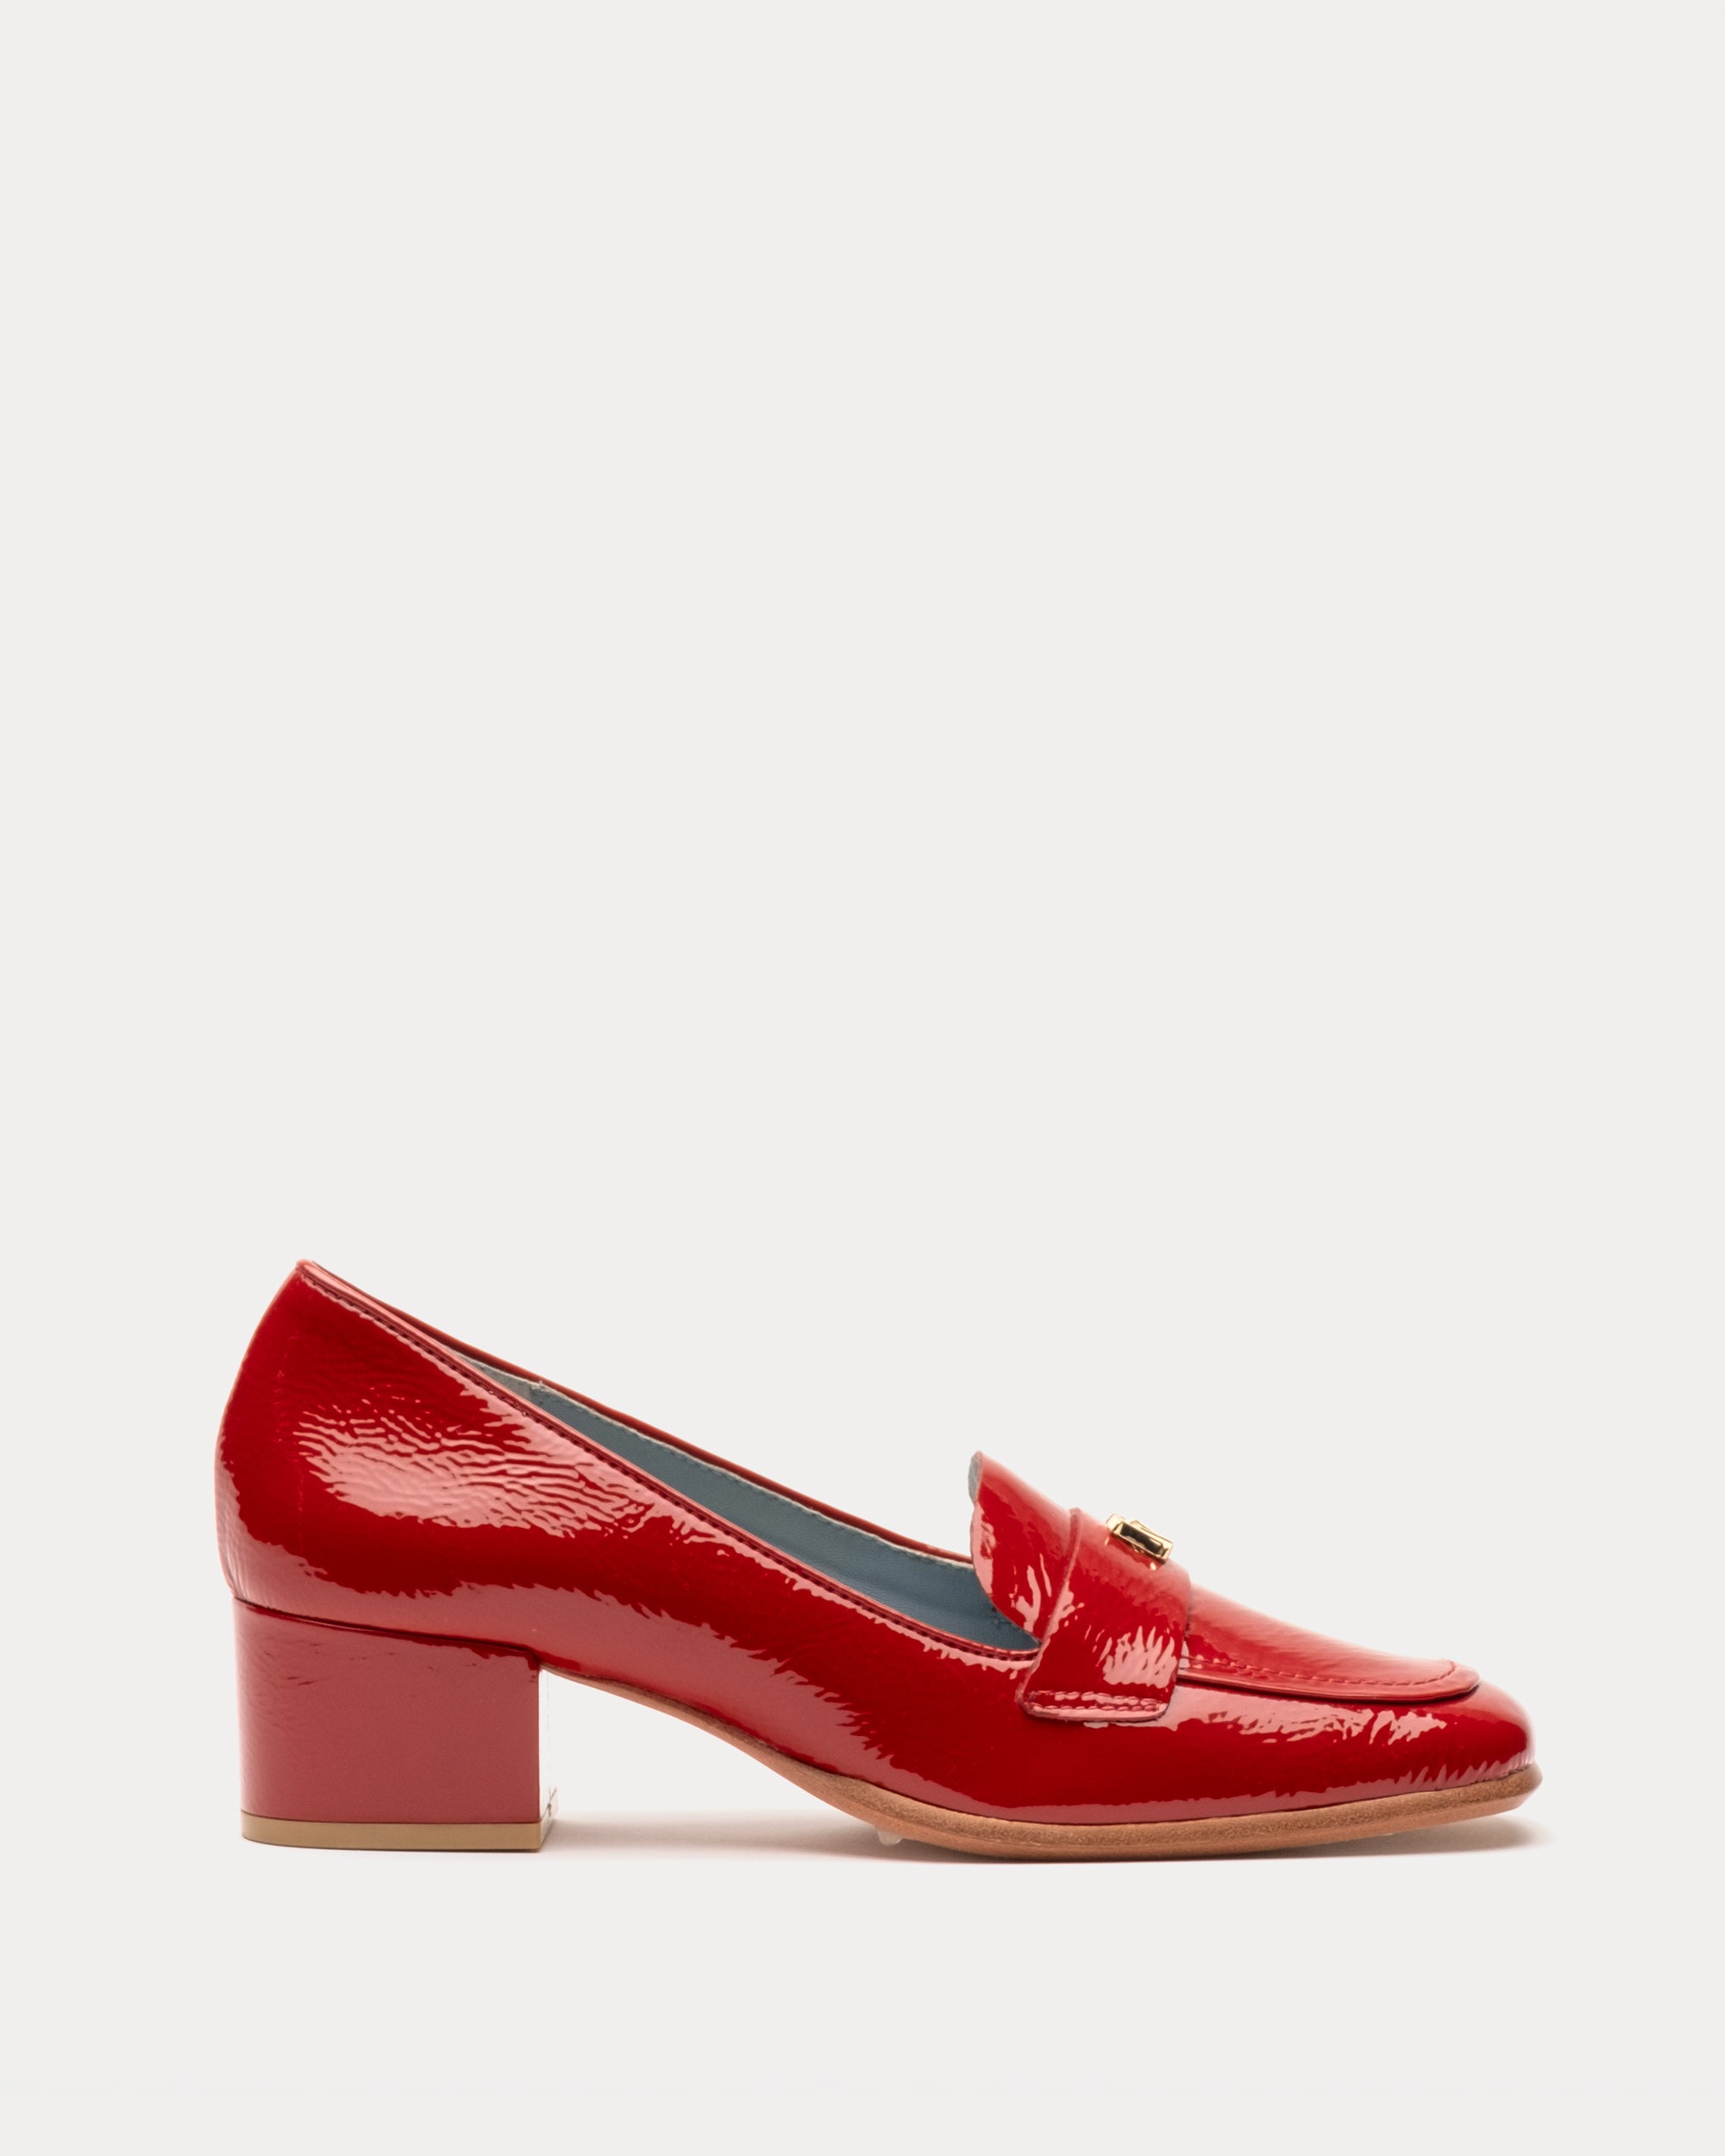 Twiggy Crinkle Soft Patent Loafer Cranberry